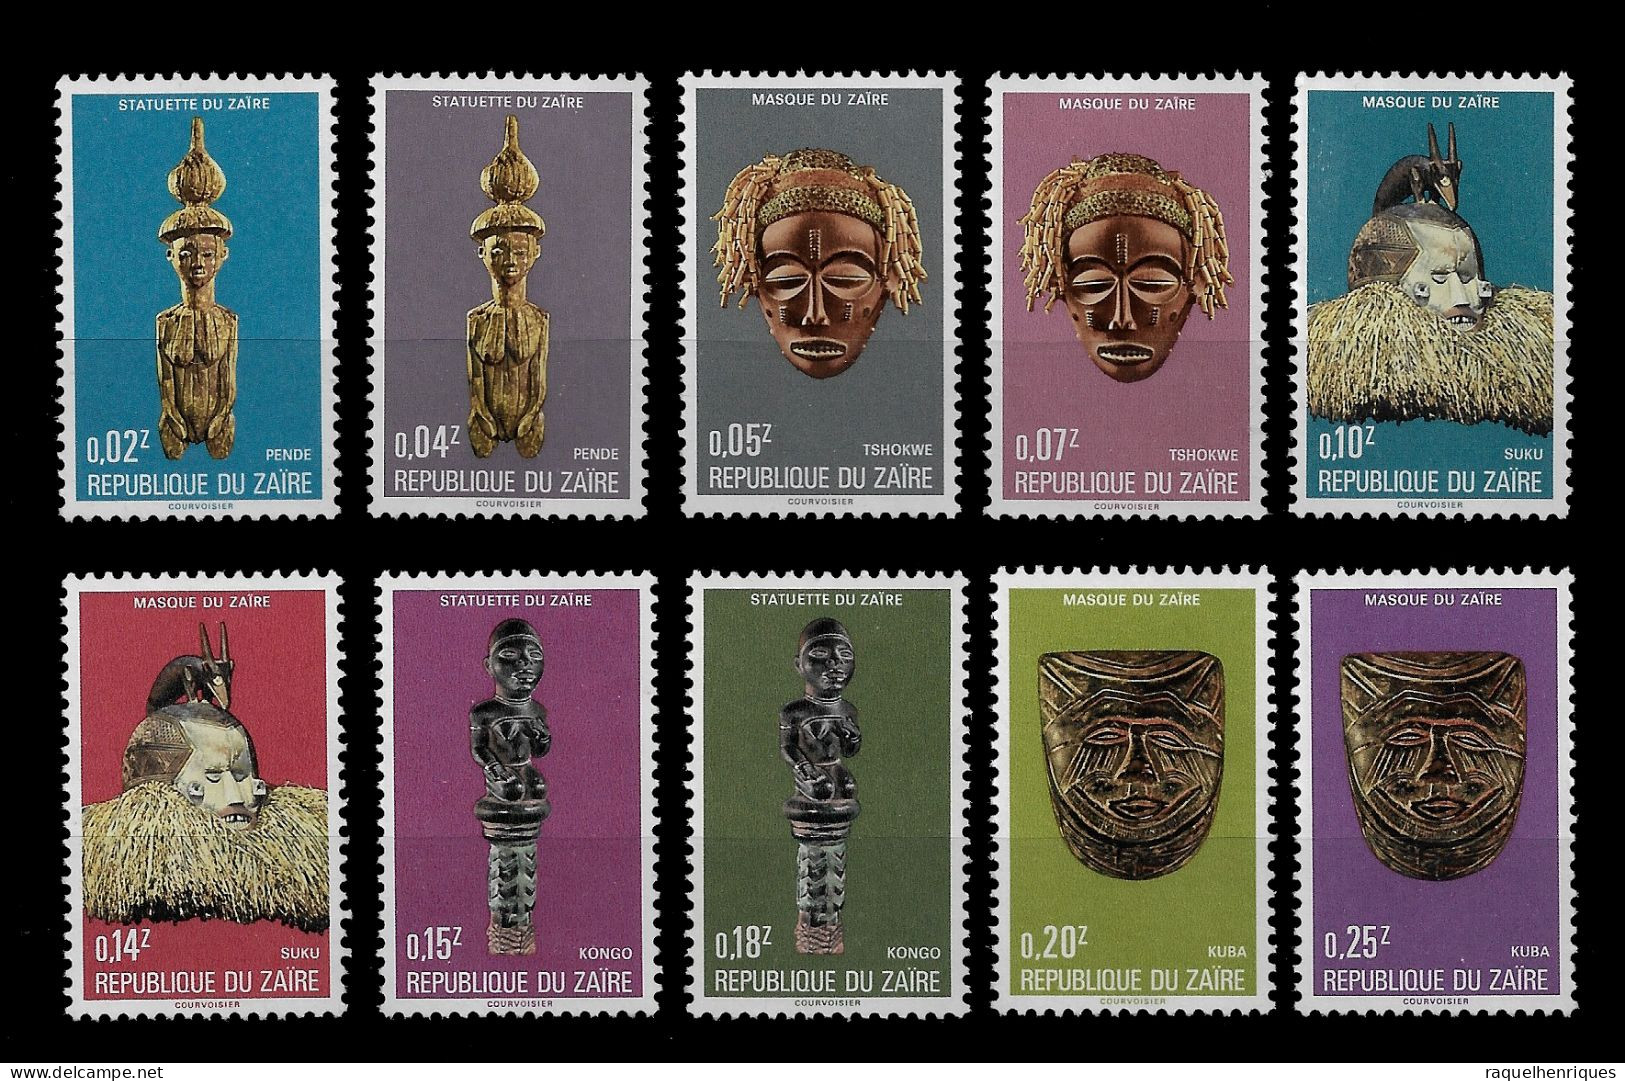 CONGO ZAIRE STAMP - 1977 Masks And Statuettes SET MNH (NP#01) - Neufs